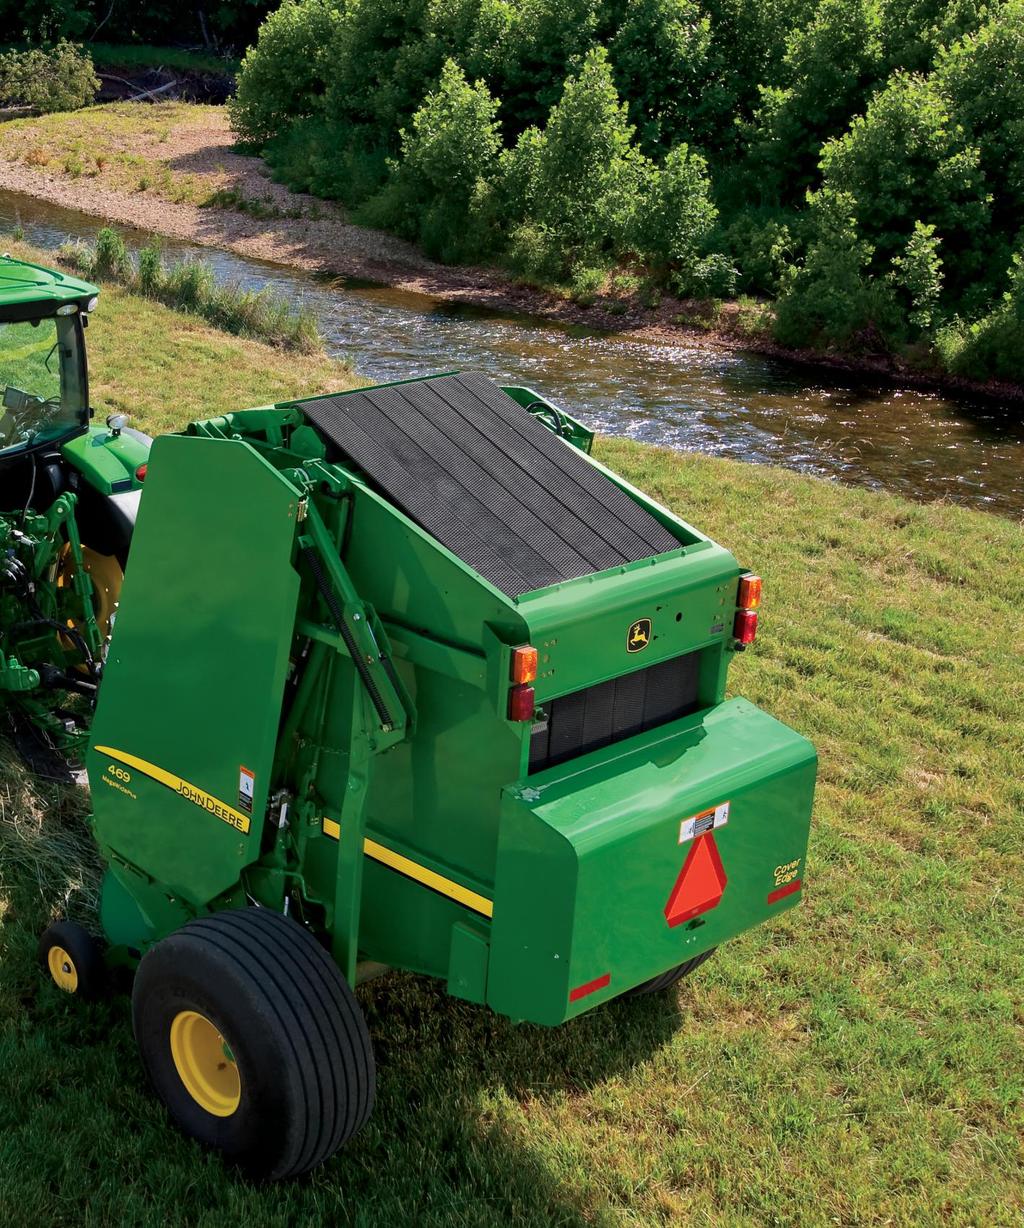 balers the added strength and muscle you need from one year to the next.